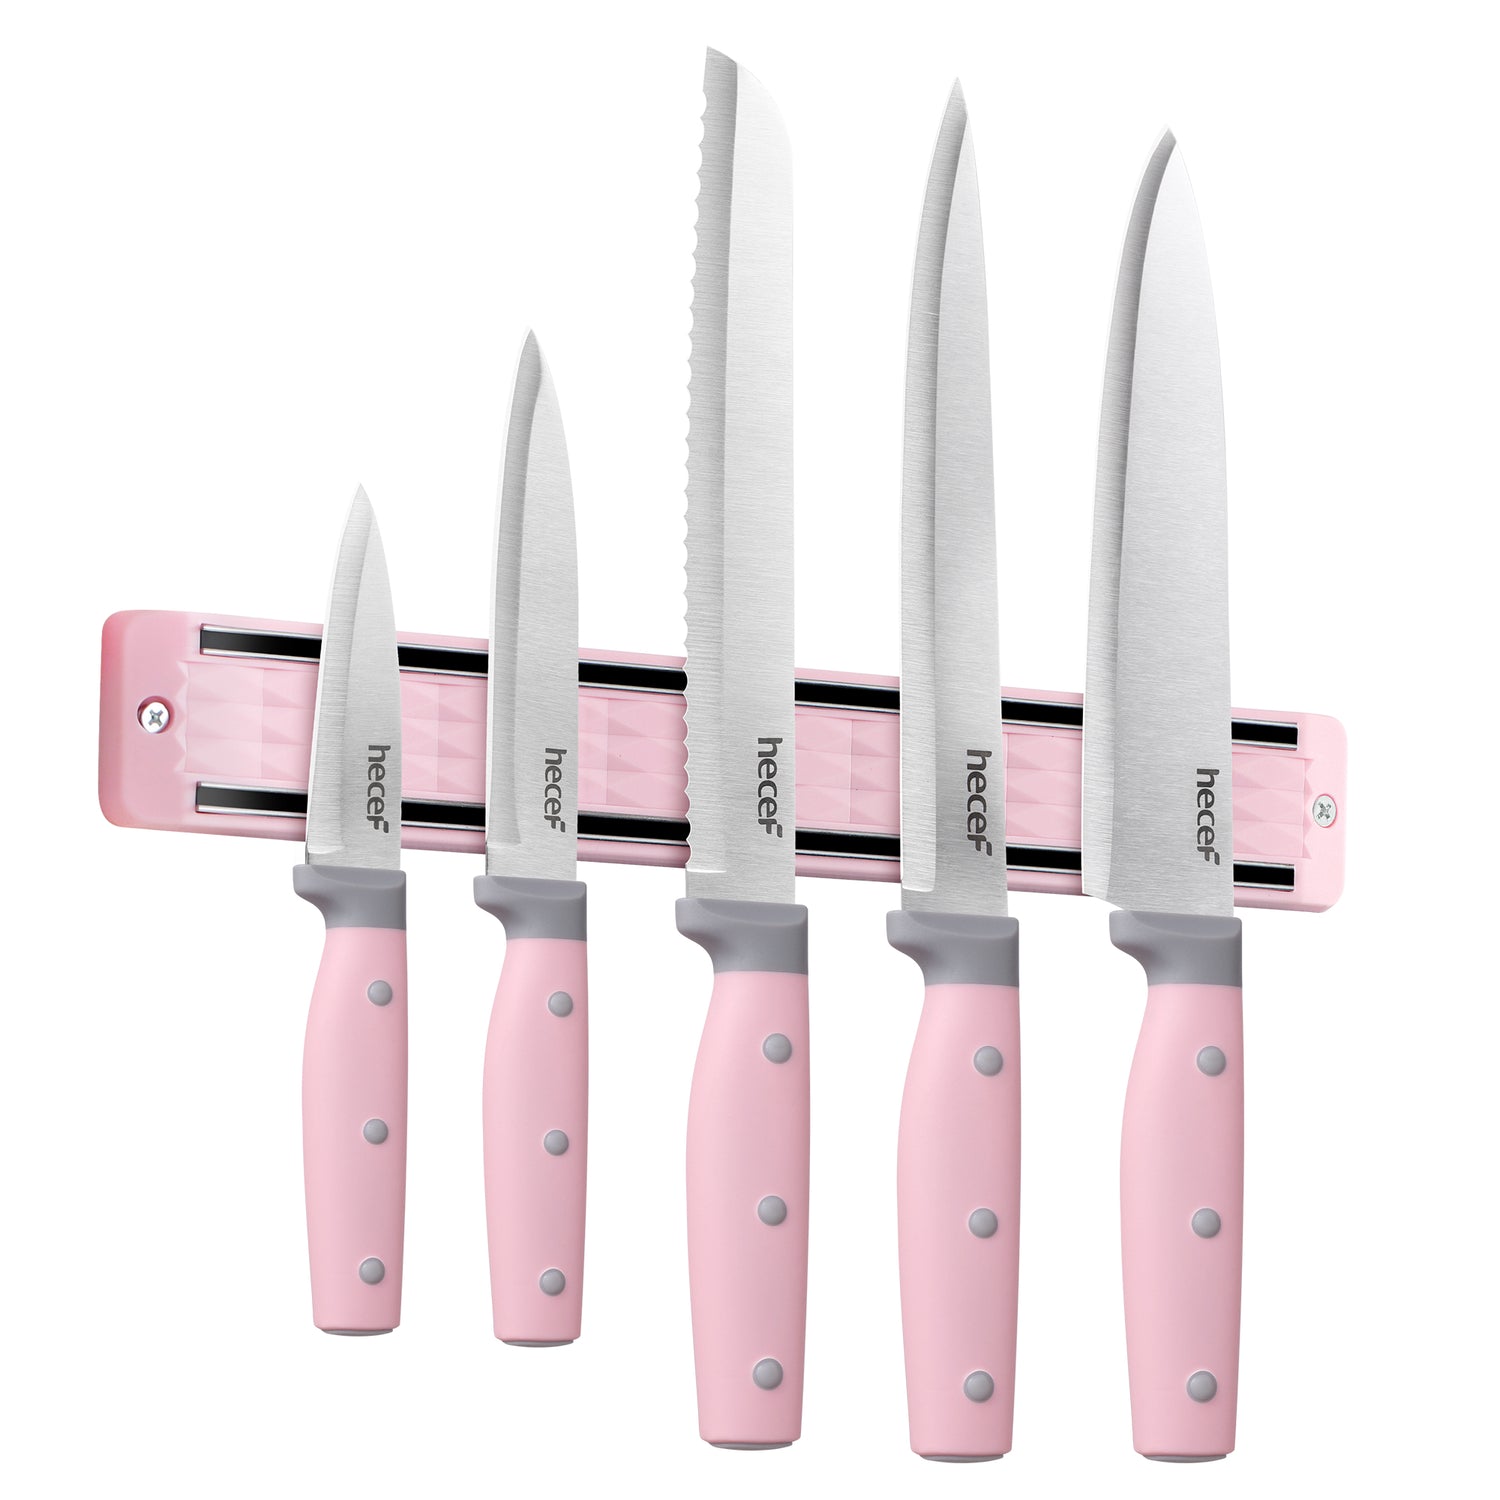 Hecef 6Pcs Kitchen Knife Set with Magnetic Strip,Professional Knives Set for Kitchen, 13-inch Magnetic Strip Stainless Steel Sharp Chef Knife Set with Purple Handle for Cutting Meat & Vegetable - Hecef Kitchen